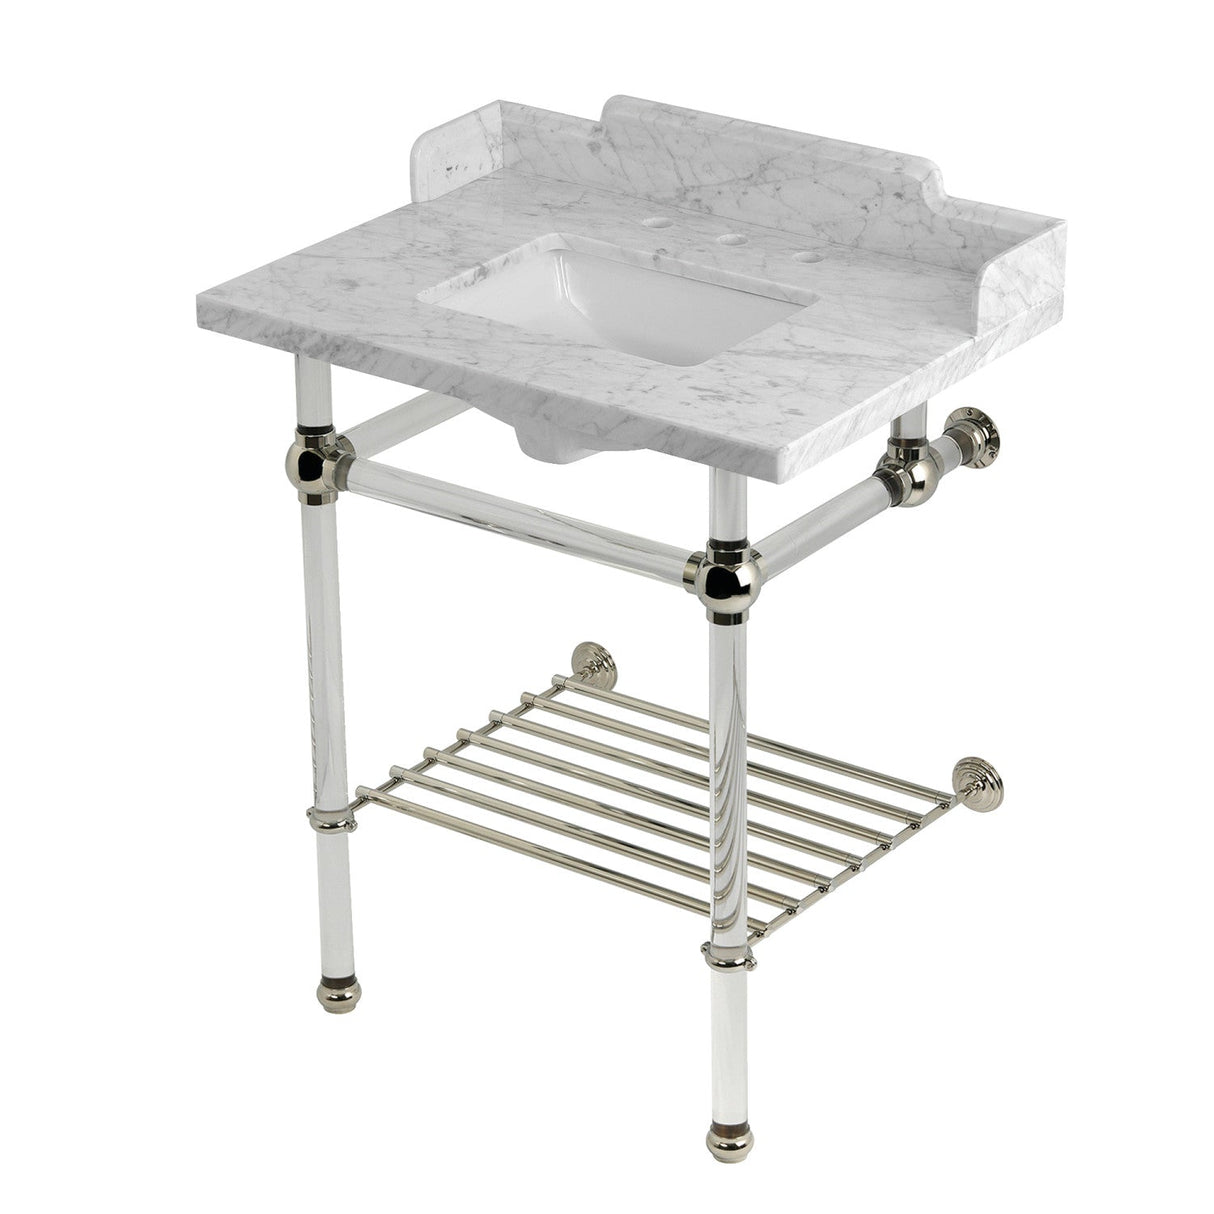 Pemberton LMS30MASQB6 30-Inch Console Sink with Acrylic Legs (8-Inch, 3 Hole), Marble White/Polished Nickel